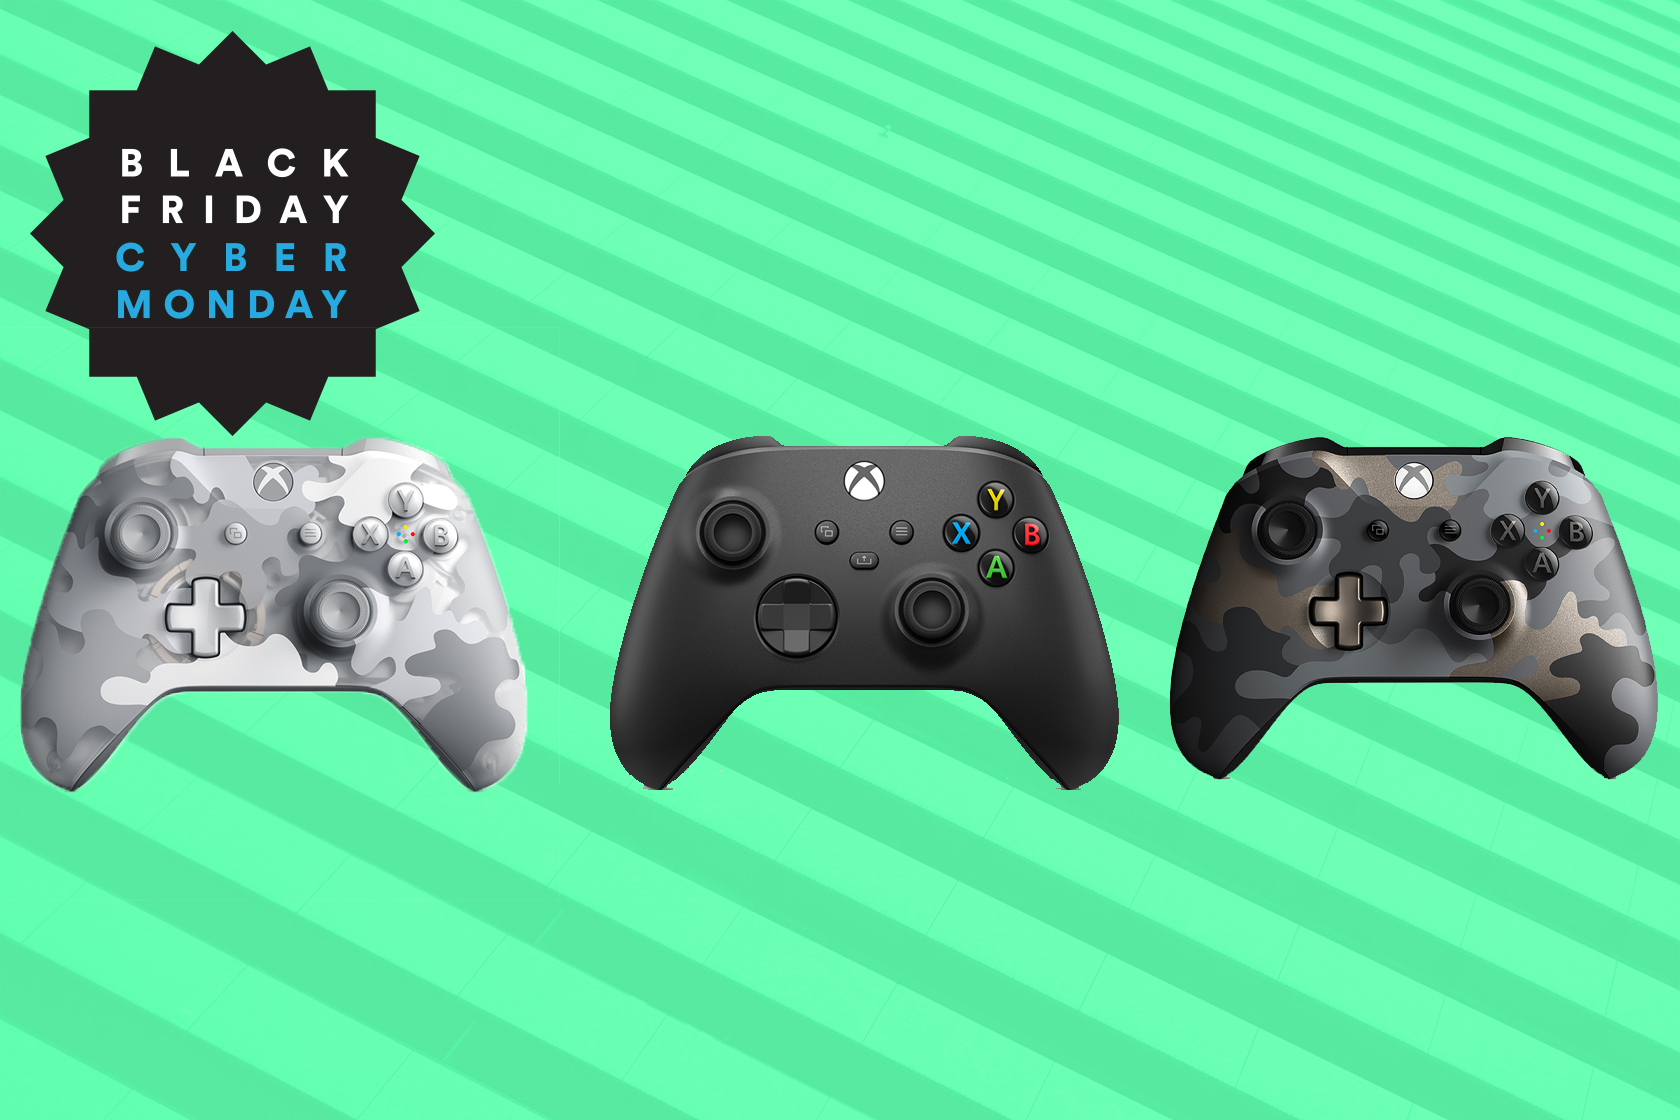 Walmart's selling Xbox controllers for $20 off